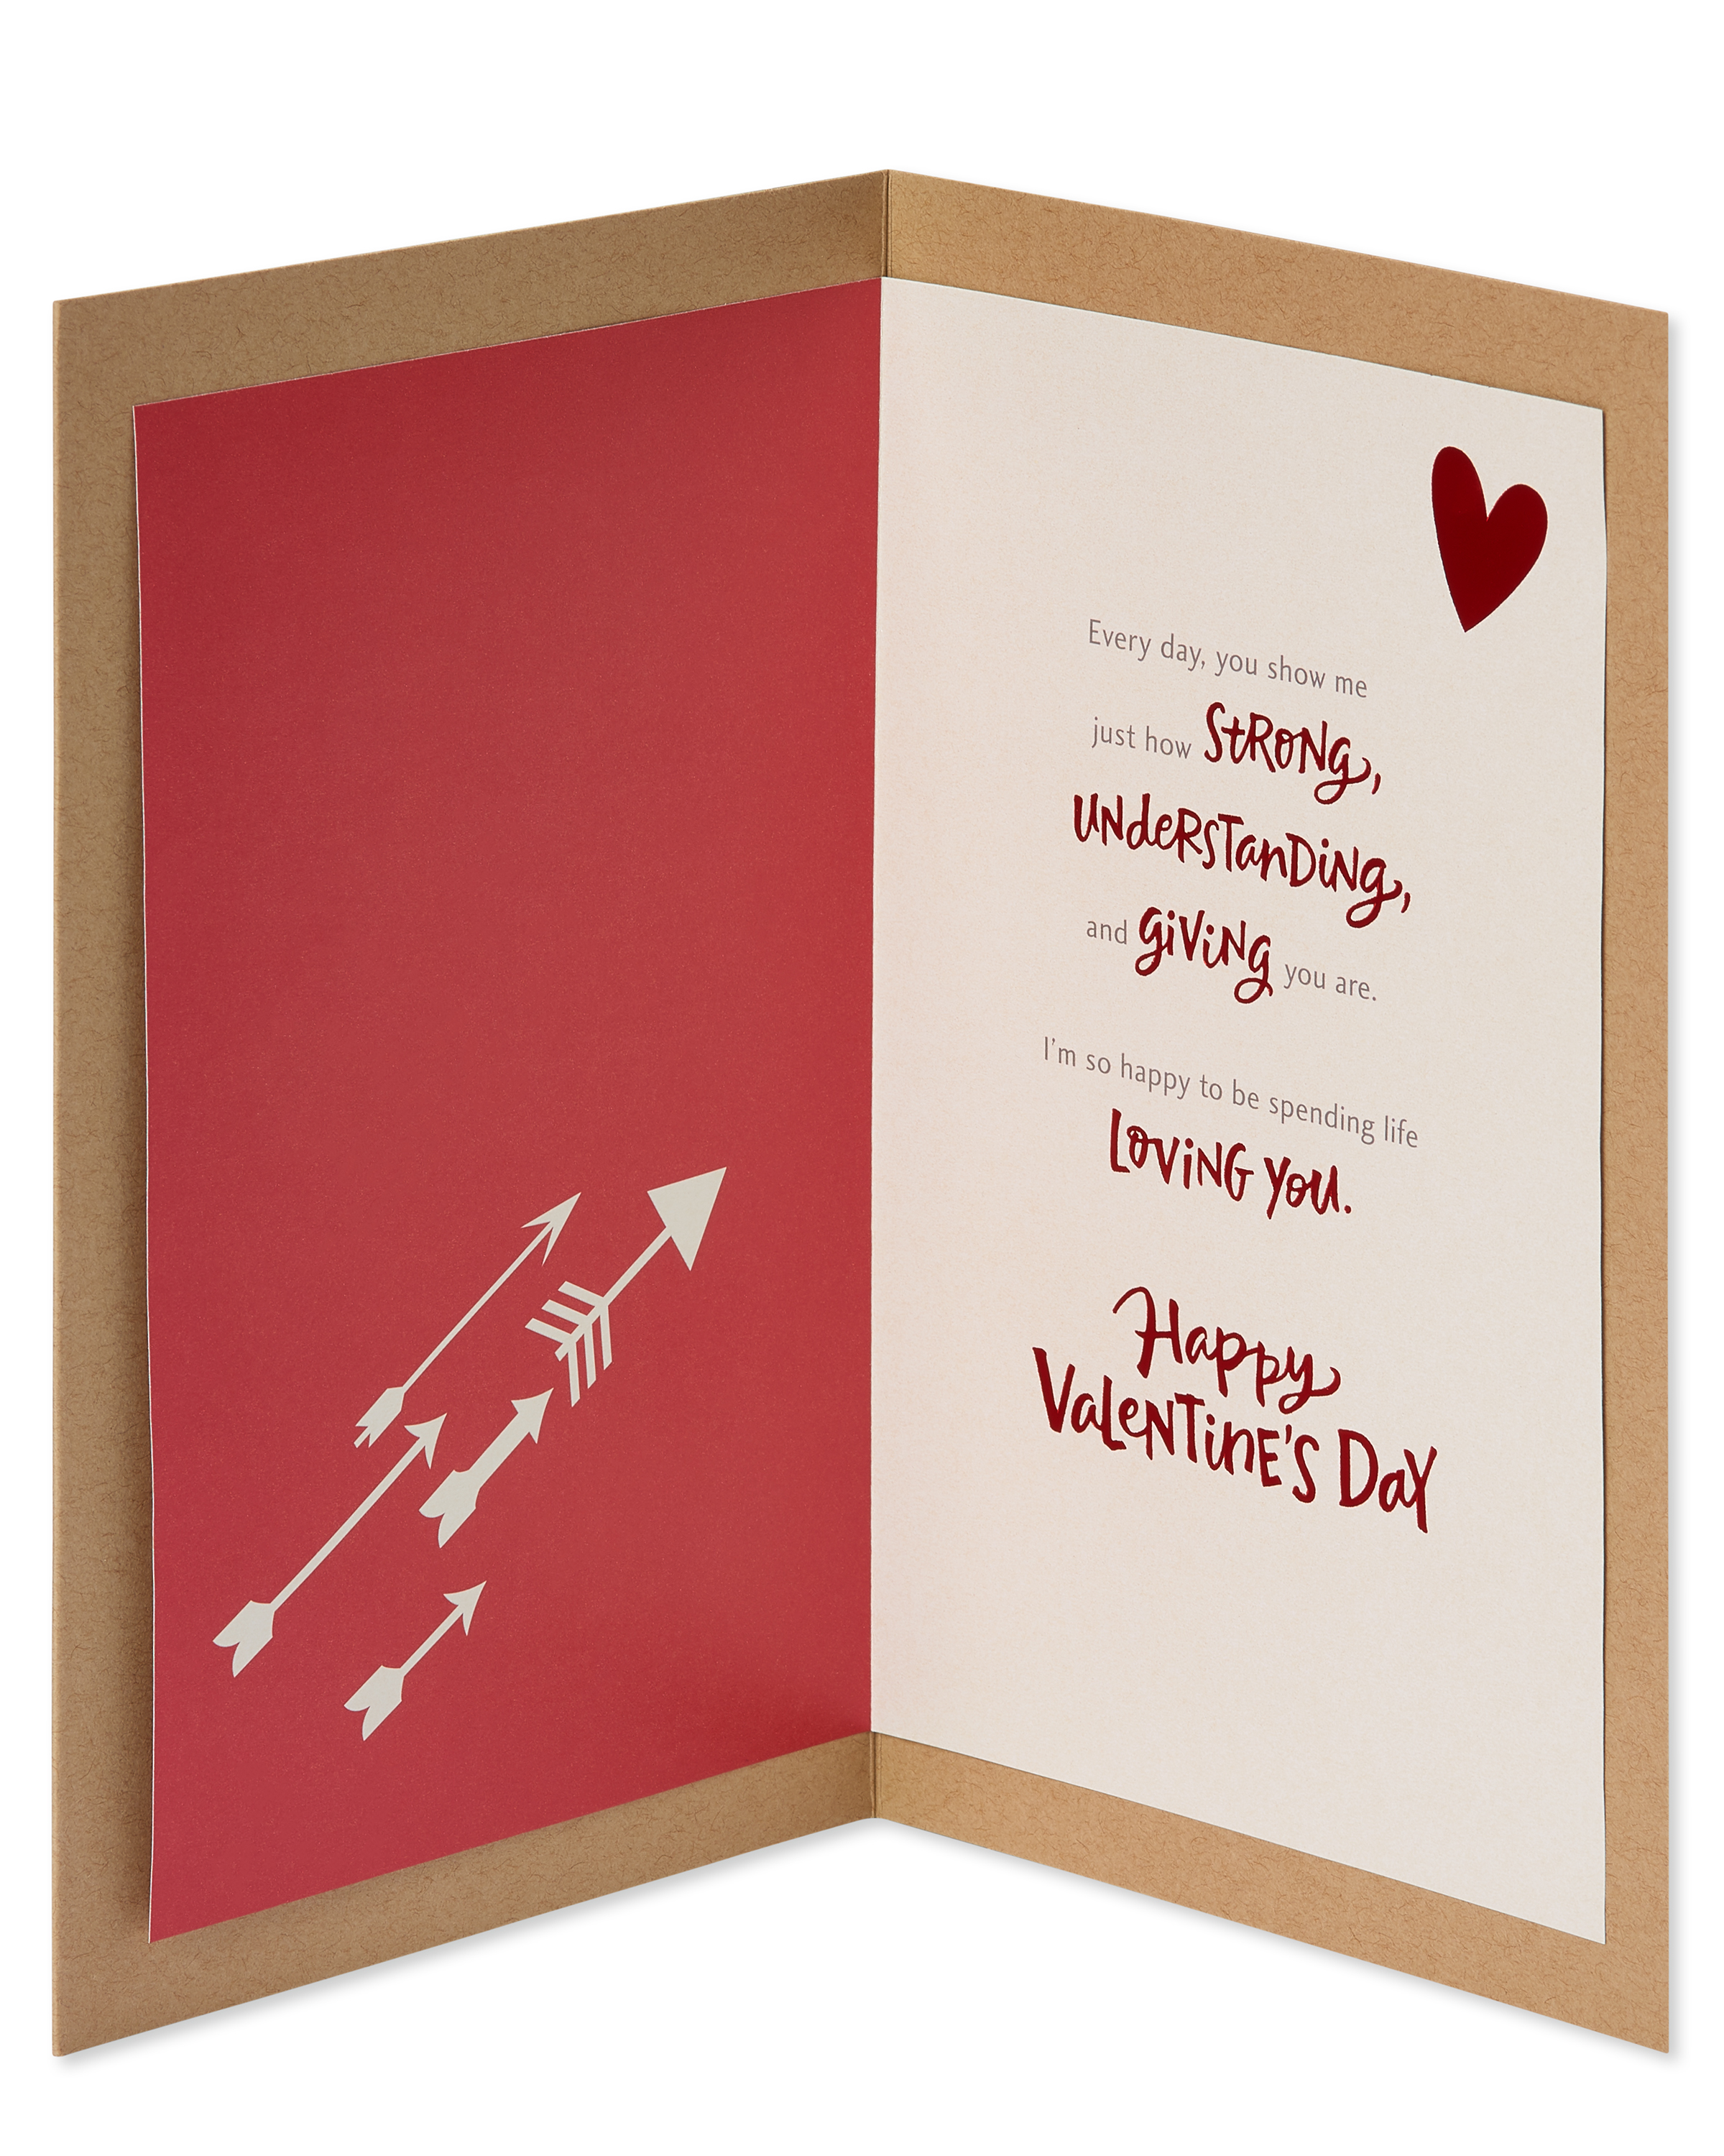 American Greetings Romantic Valentine's Day Card for Him (Man Who Has My Heart) - image 2 of 3